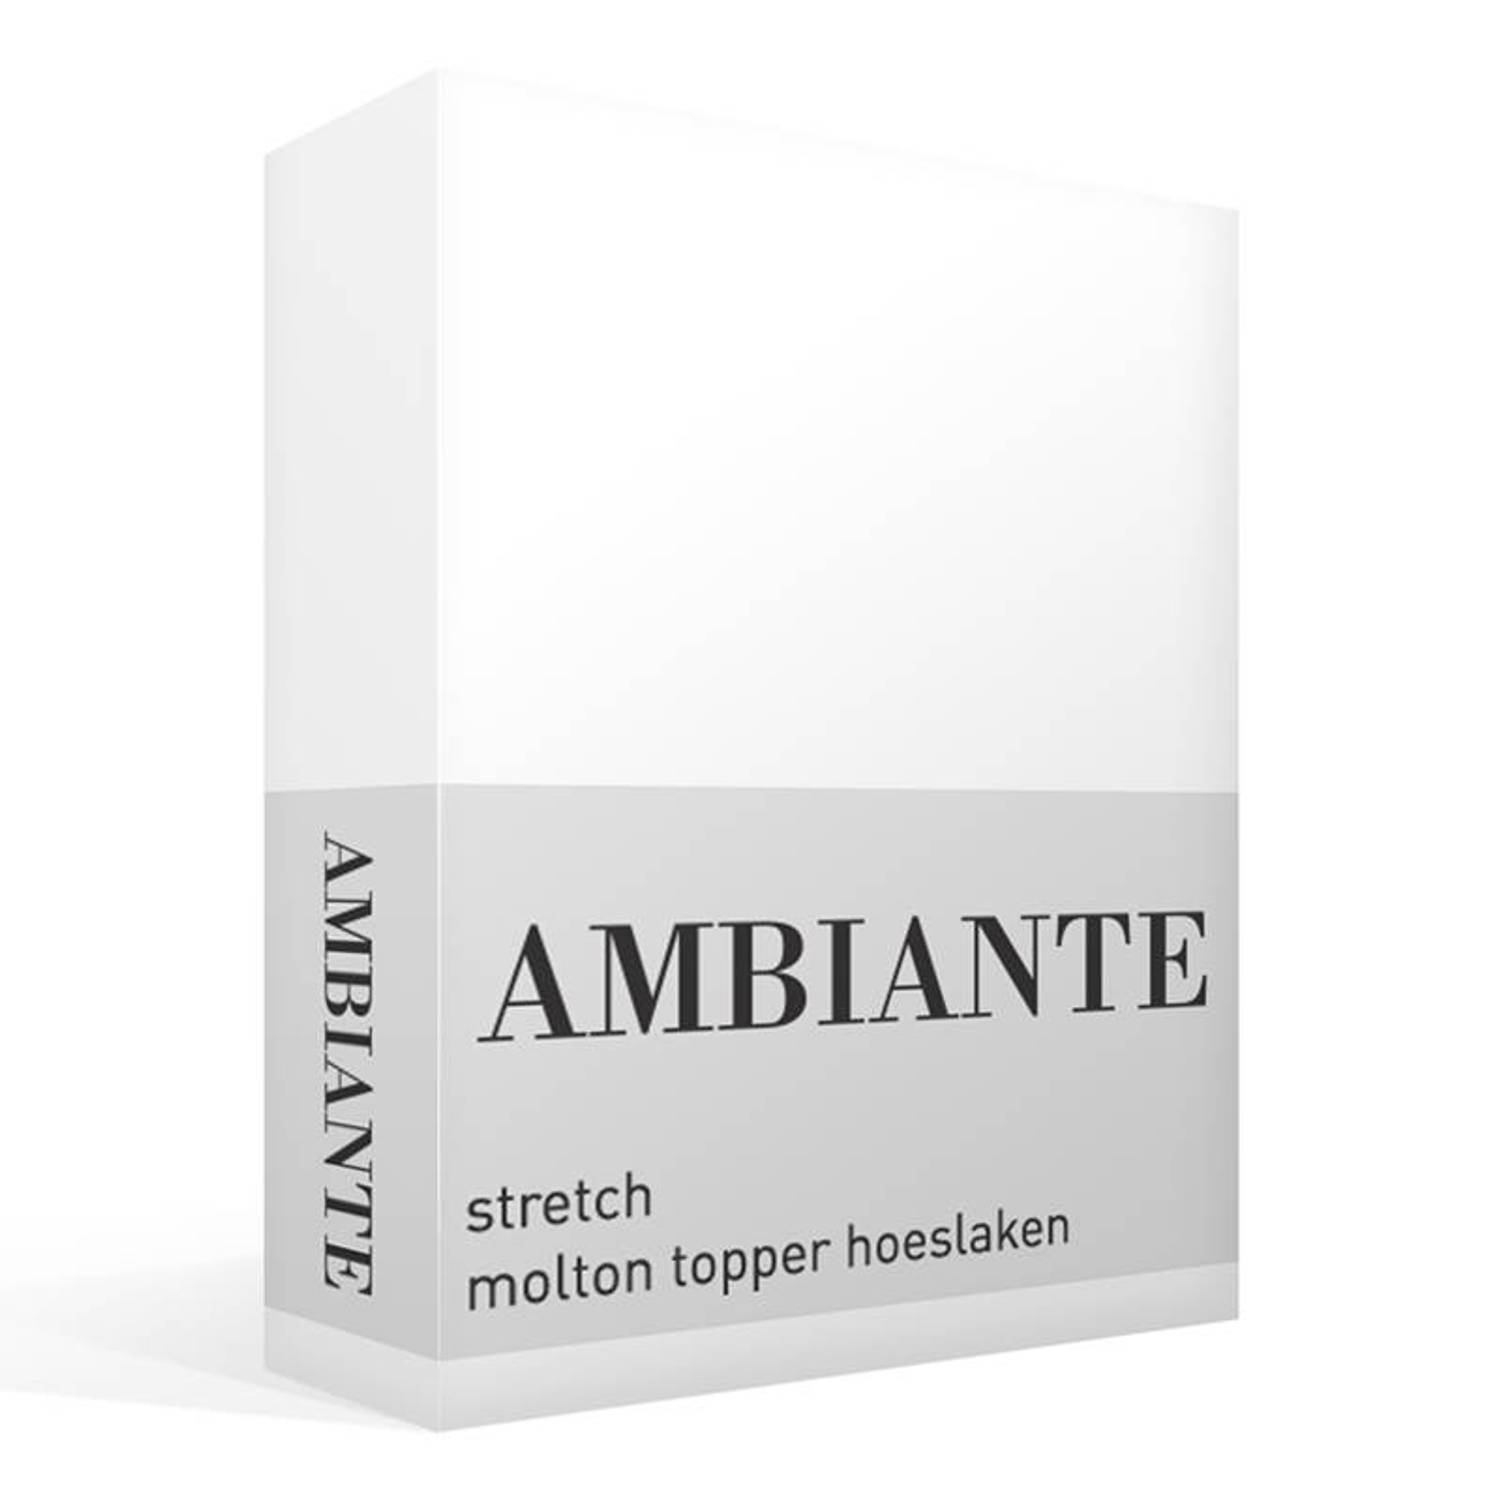 AMBIANTE Stretch Molton Topper Hoeslaken - 60% Polyester - 40% Katoen - 1-persoons (90x200 Cm) - - Wit